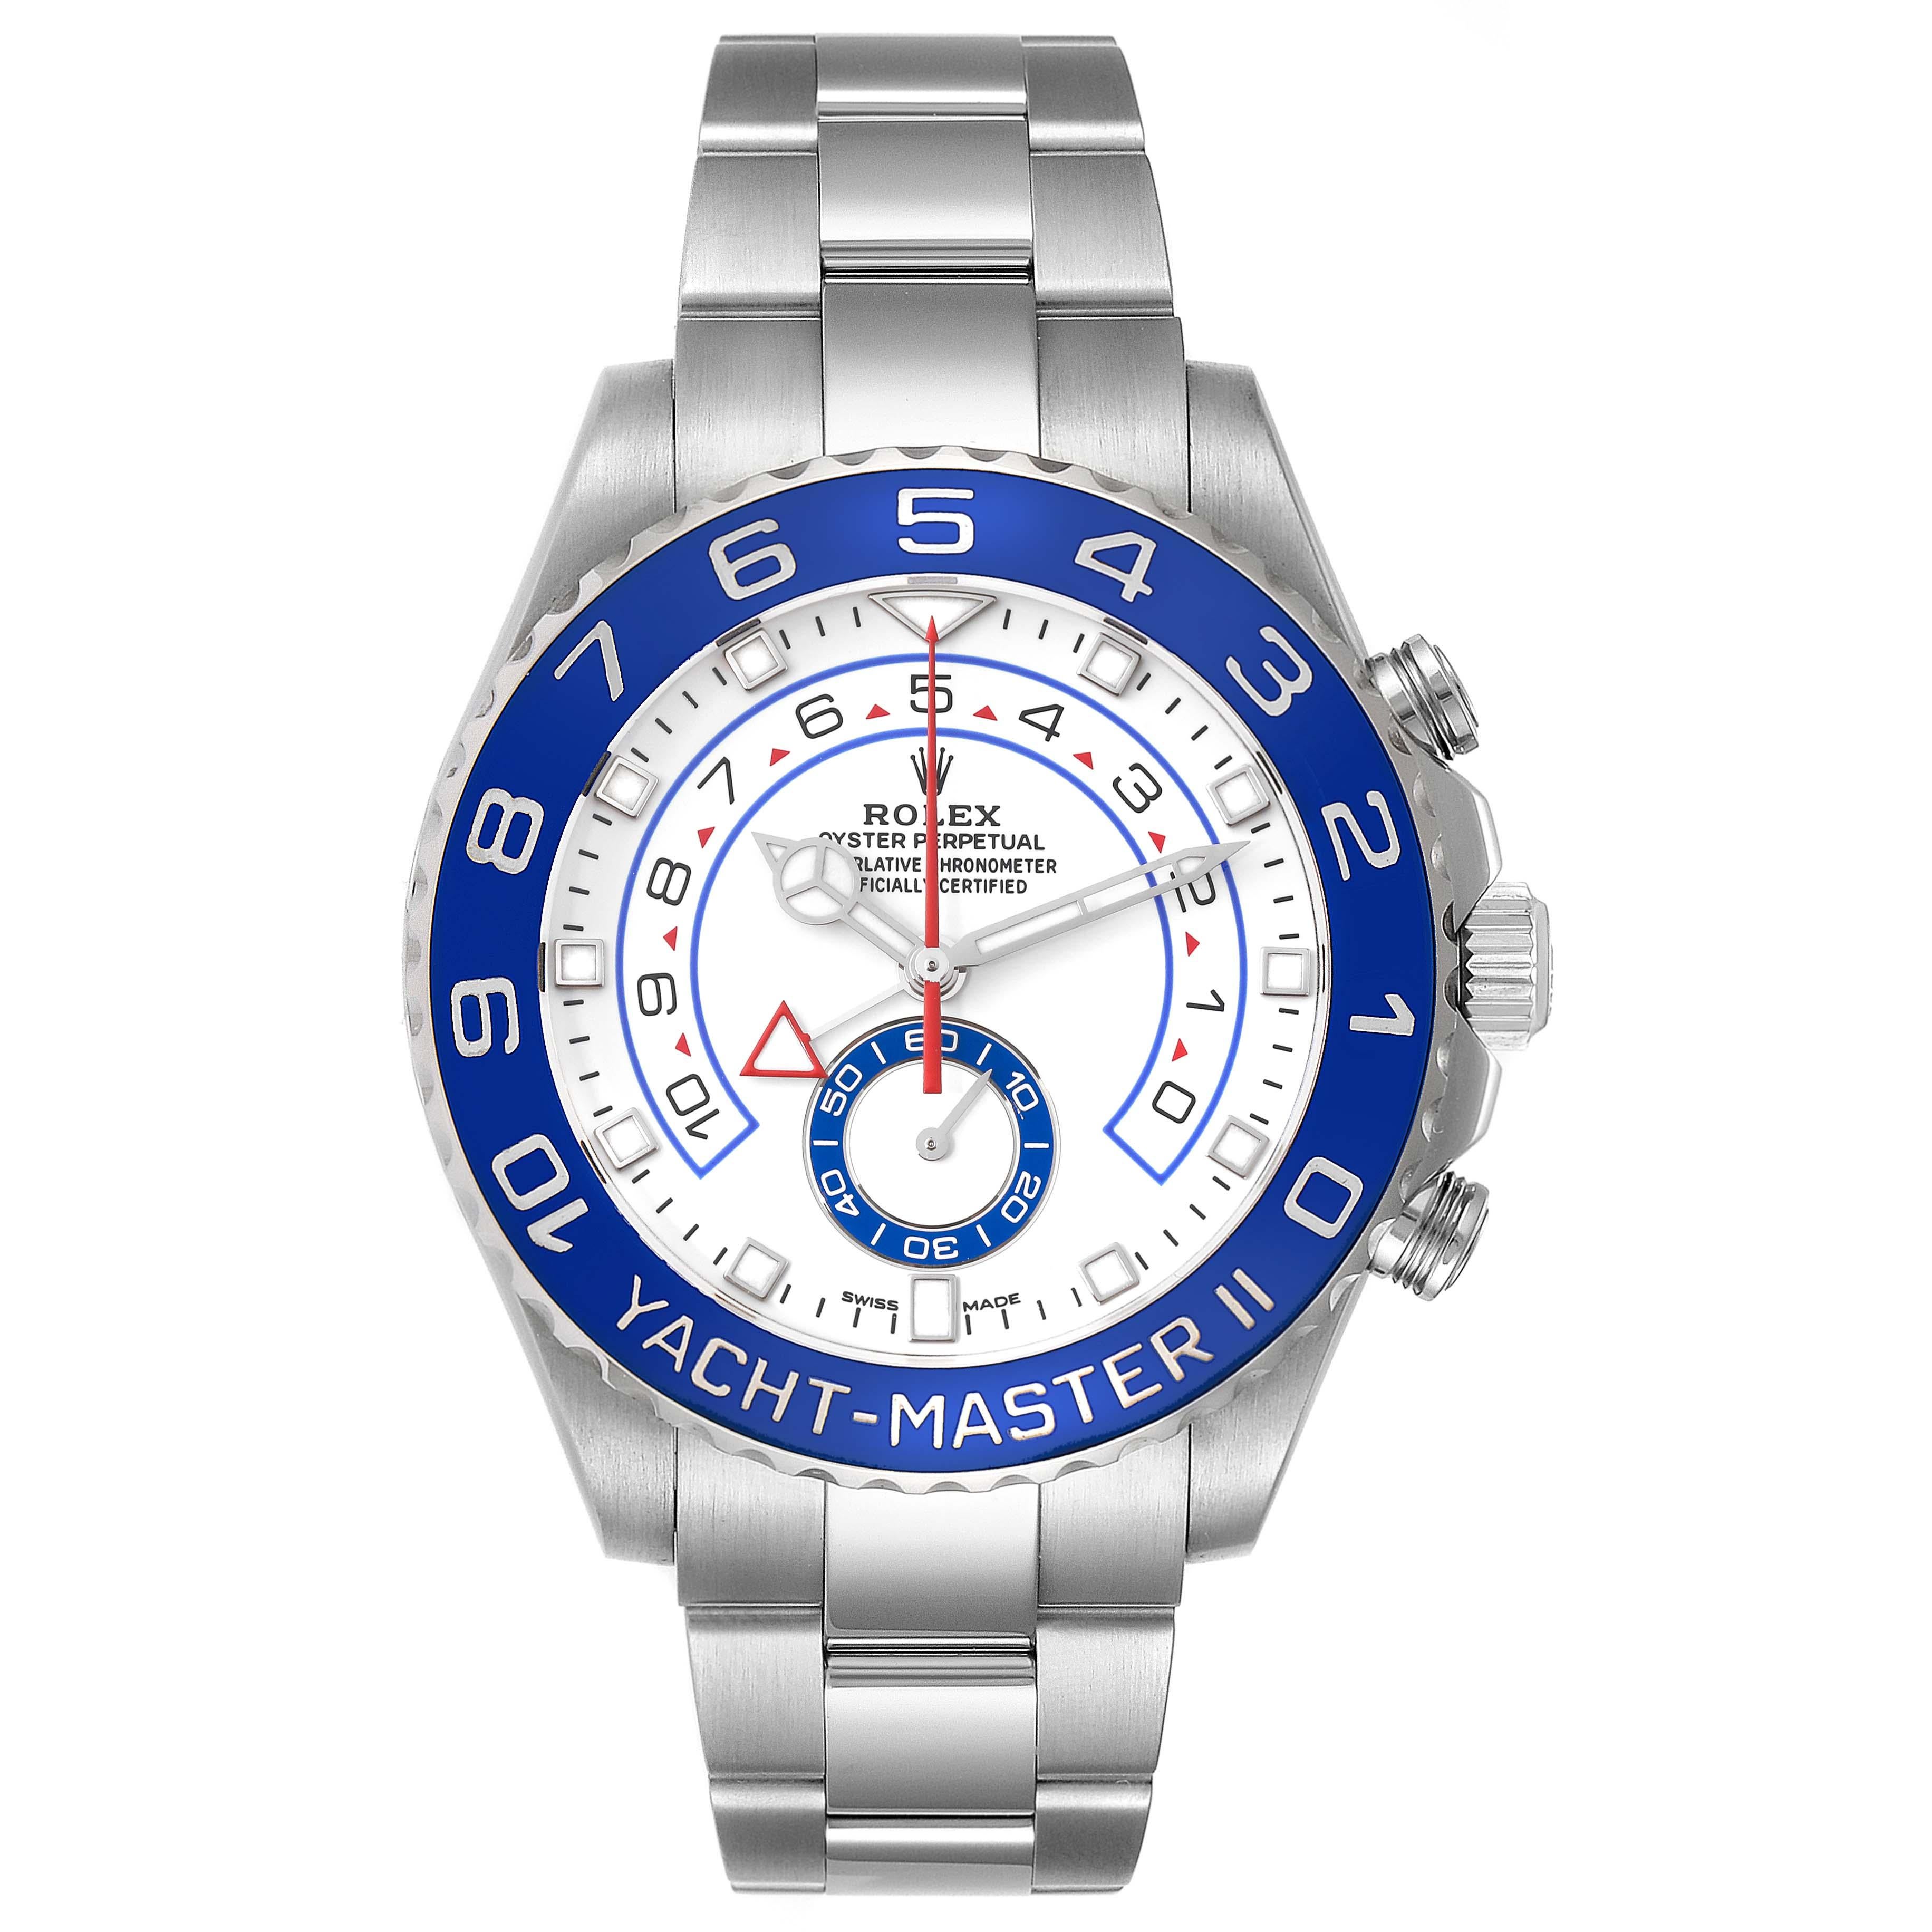 Rolex Yachtmaster II 44 Blue Cerachrom Bezel Steel Mens Watch 116680 Box Card. Officially certified chronometer automatic self-winding movement with Regatta chronograph function. Stainless steel case 44.0 mm in diameter. Screw down crown and